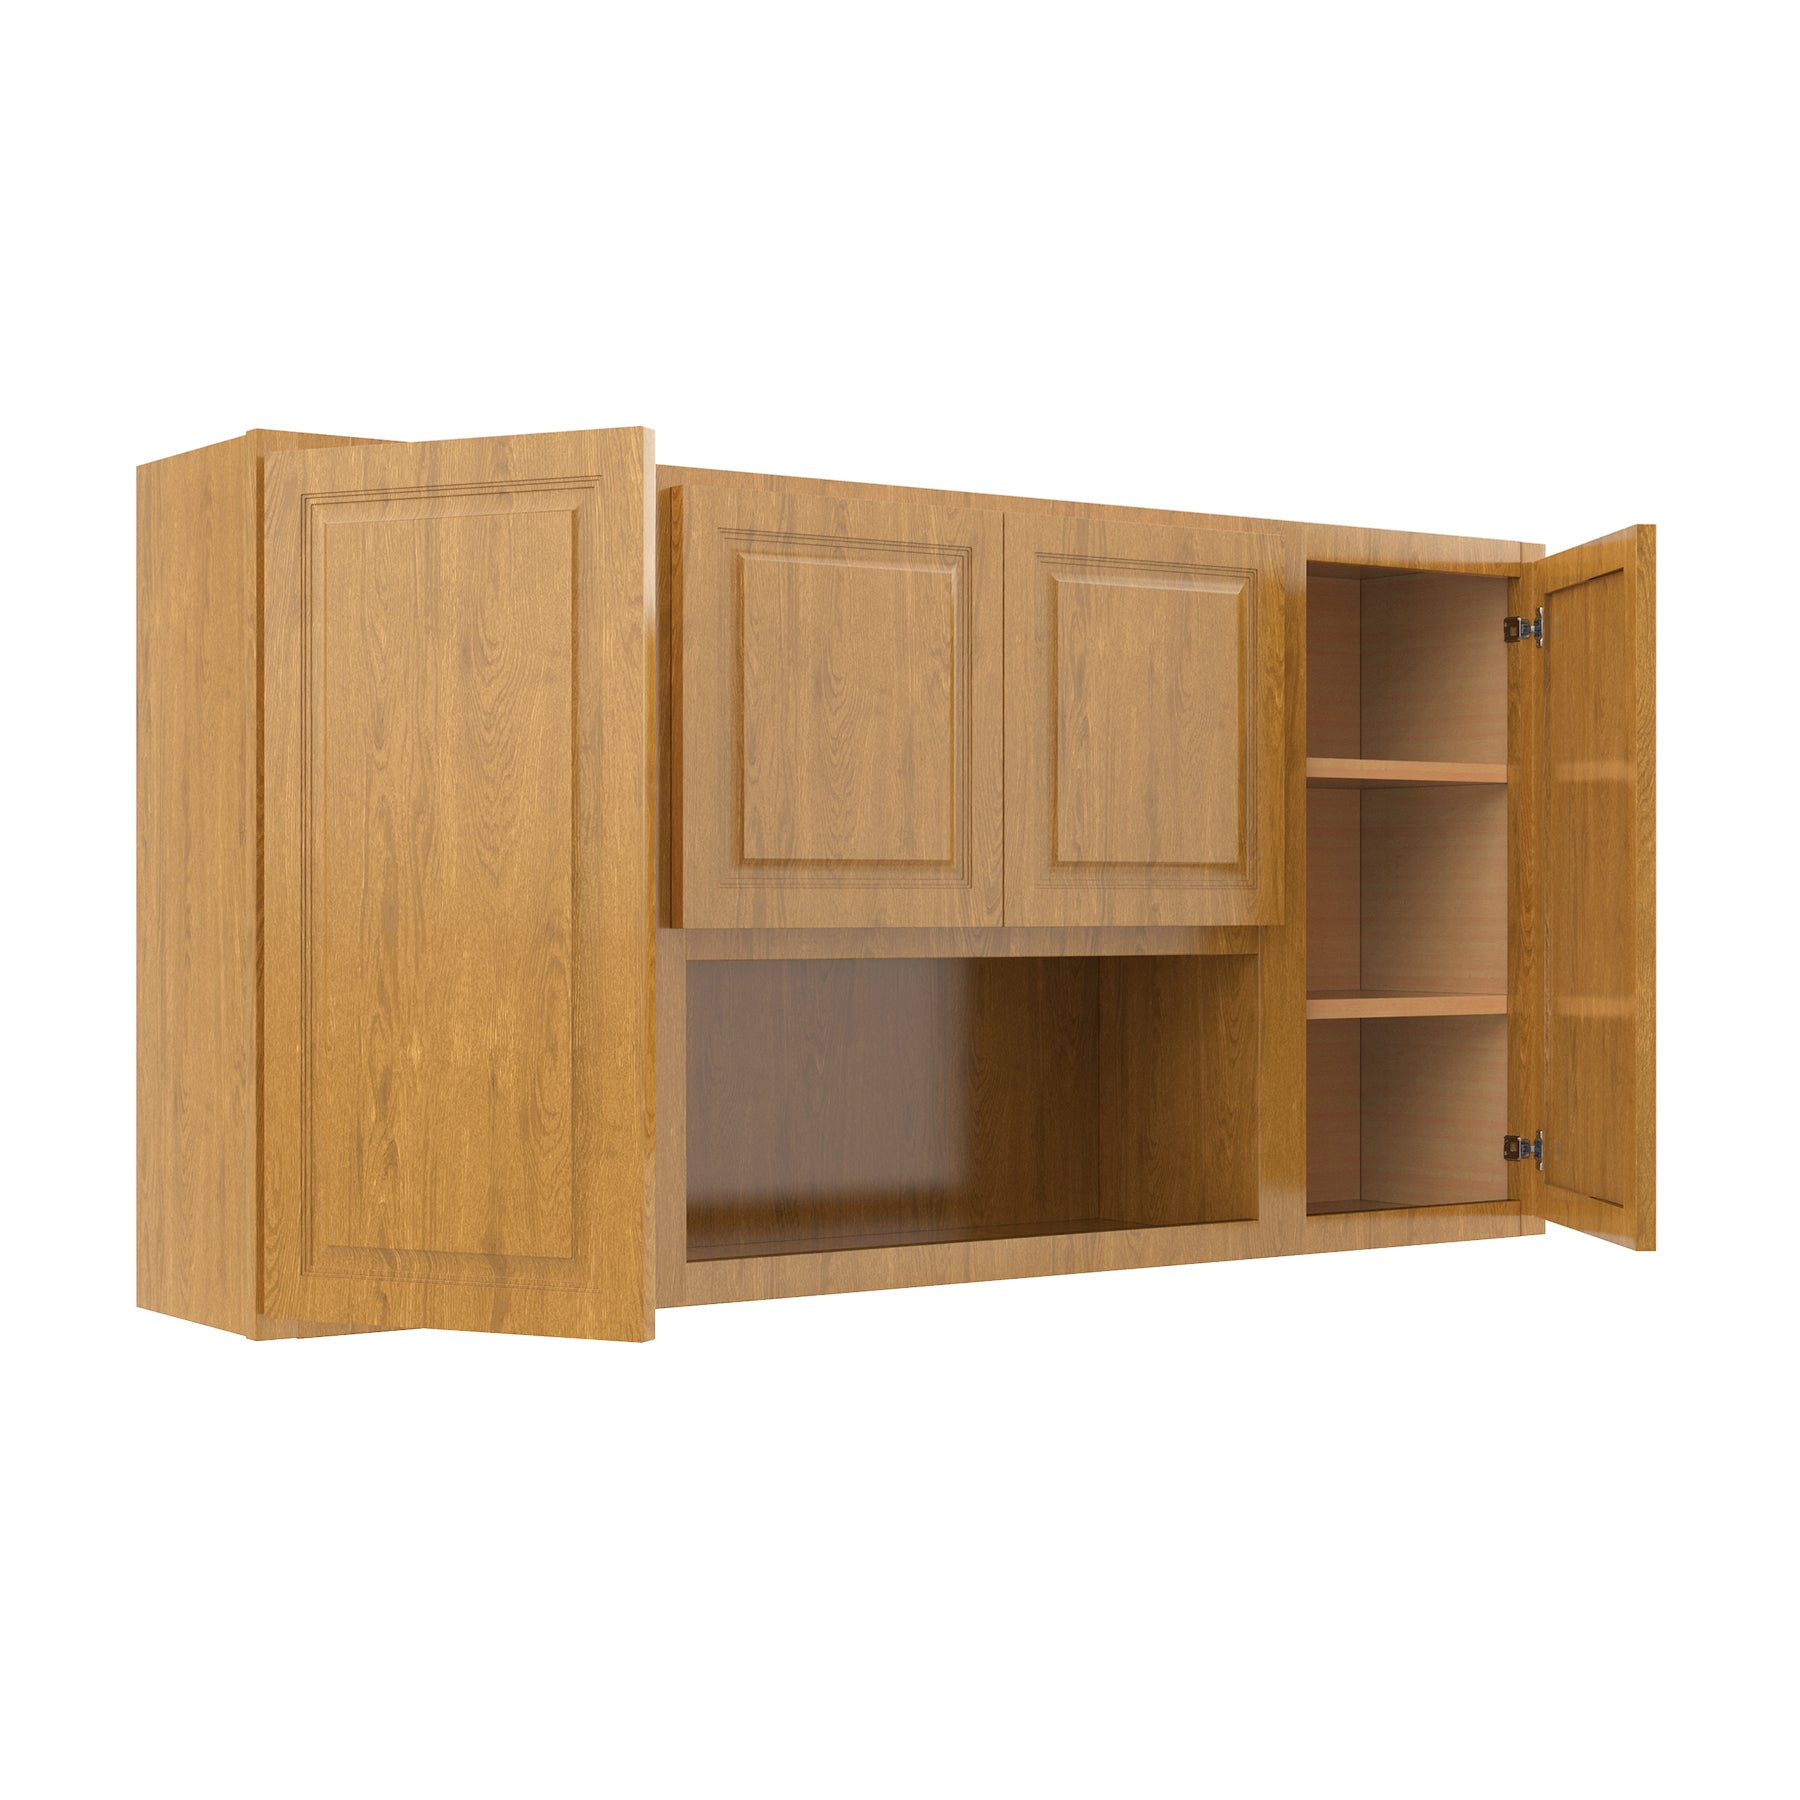 Country Oak 60"W x 30"H Wall Cabinet